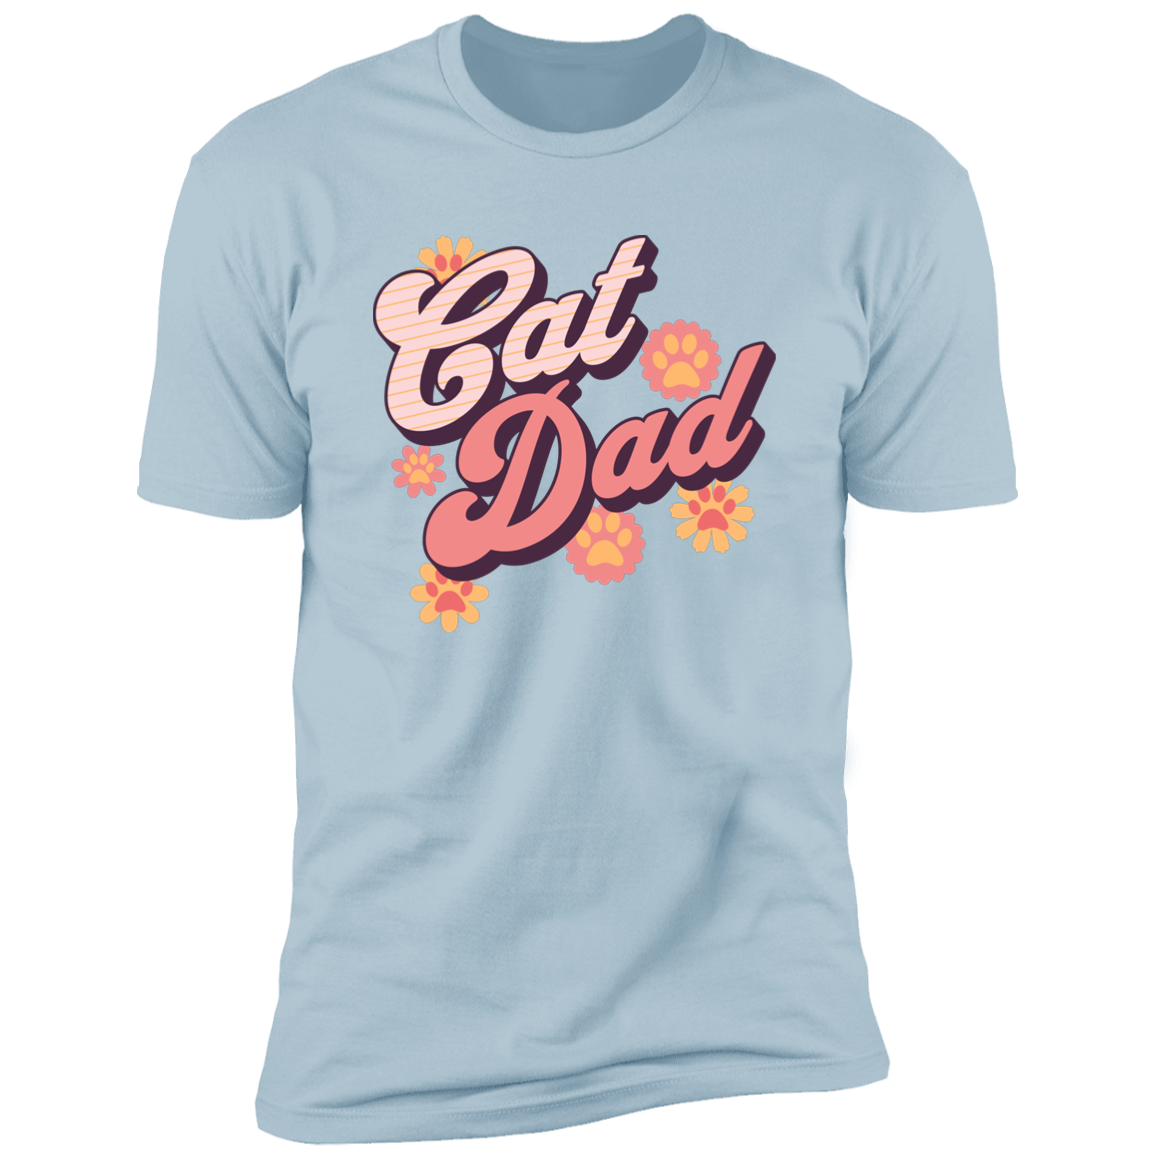 Cat Dad Retro T-shirt, Cat Dad Shirt for humans, in light blue